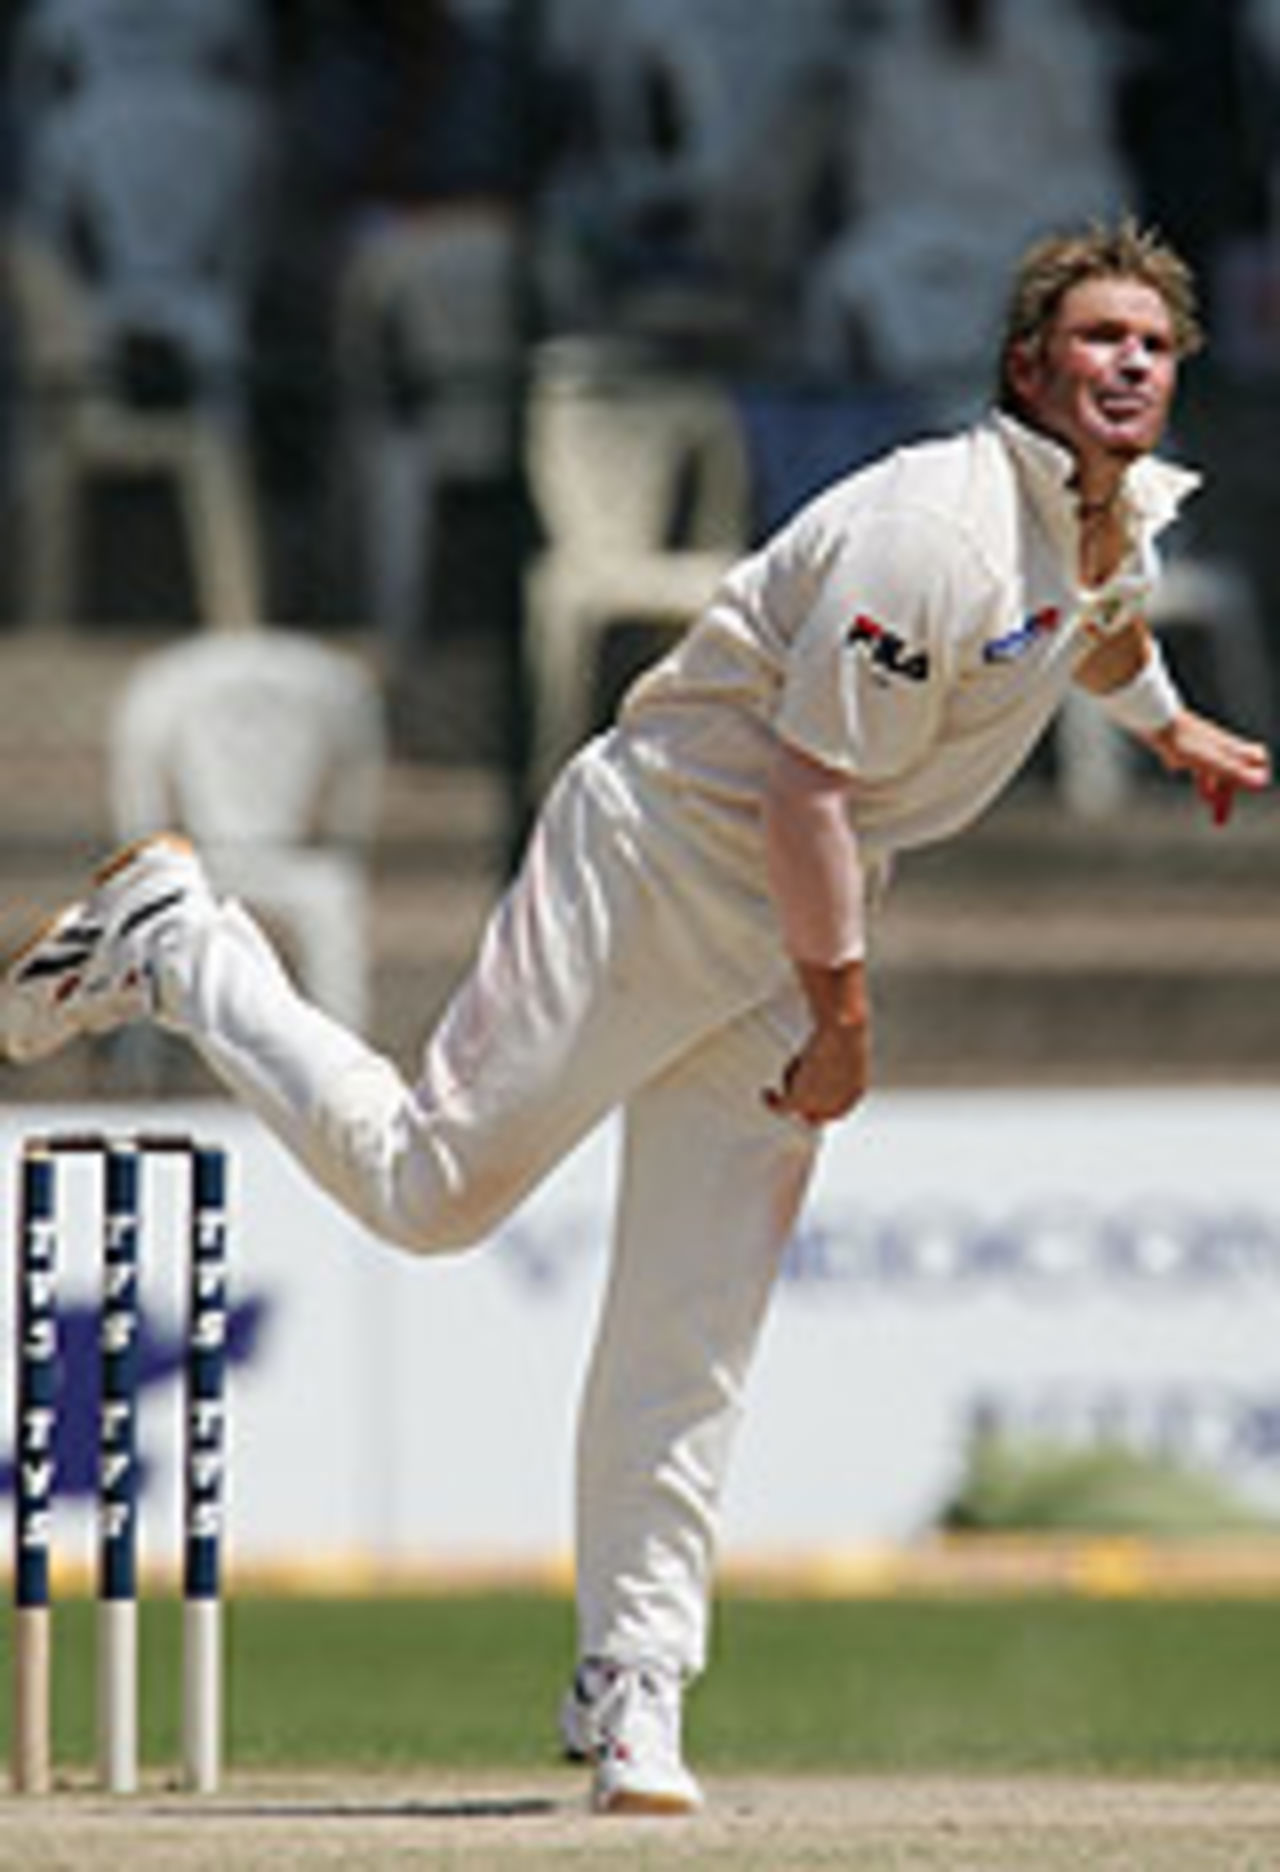 Shane Warne hurls a delivery on a wearing pitch, India v Australia, 1st Test, Bangalore, 3rd day, October 8, 2004